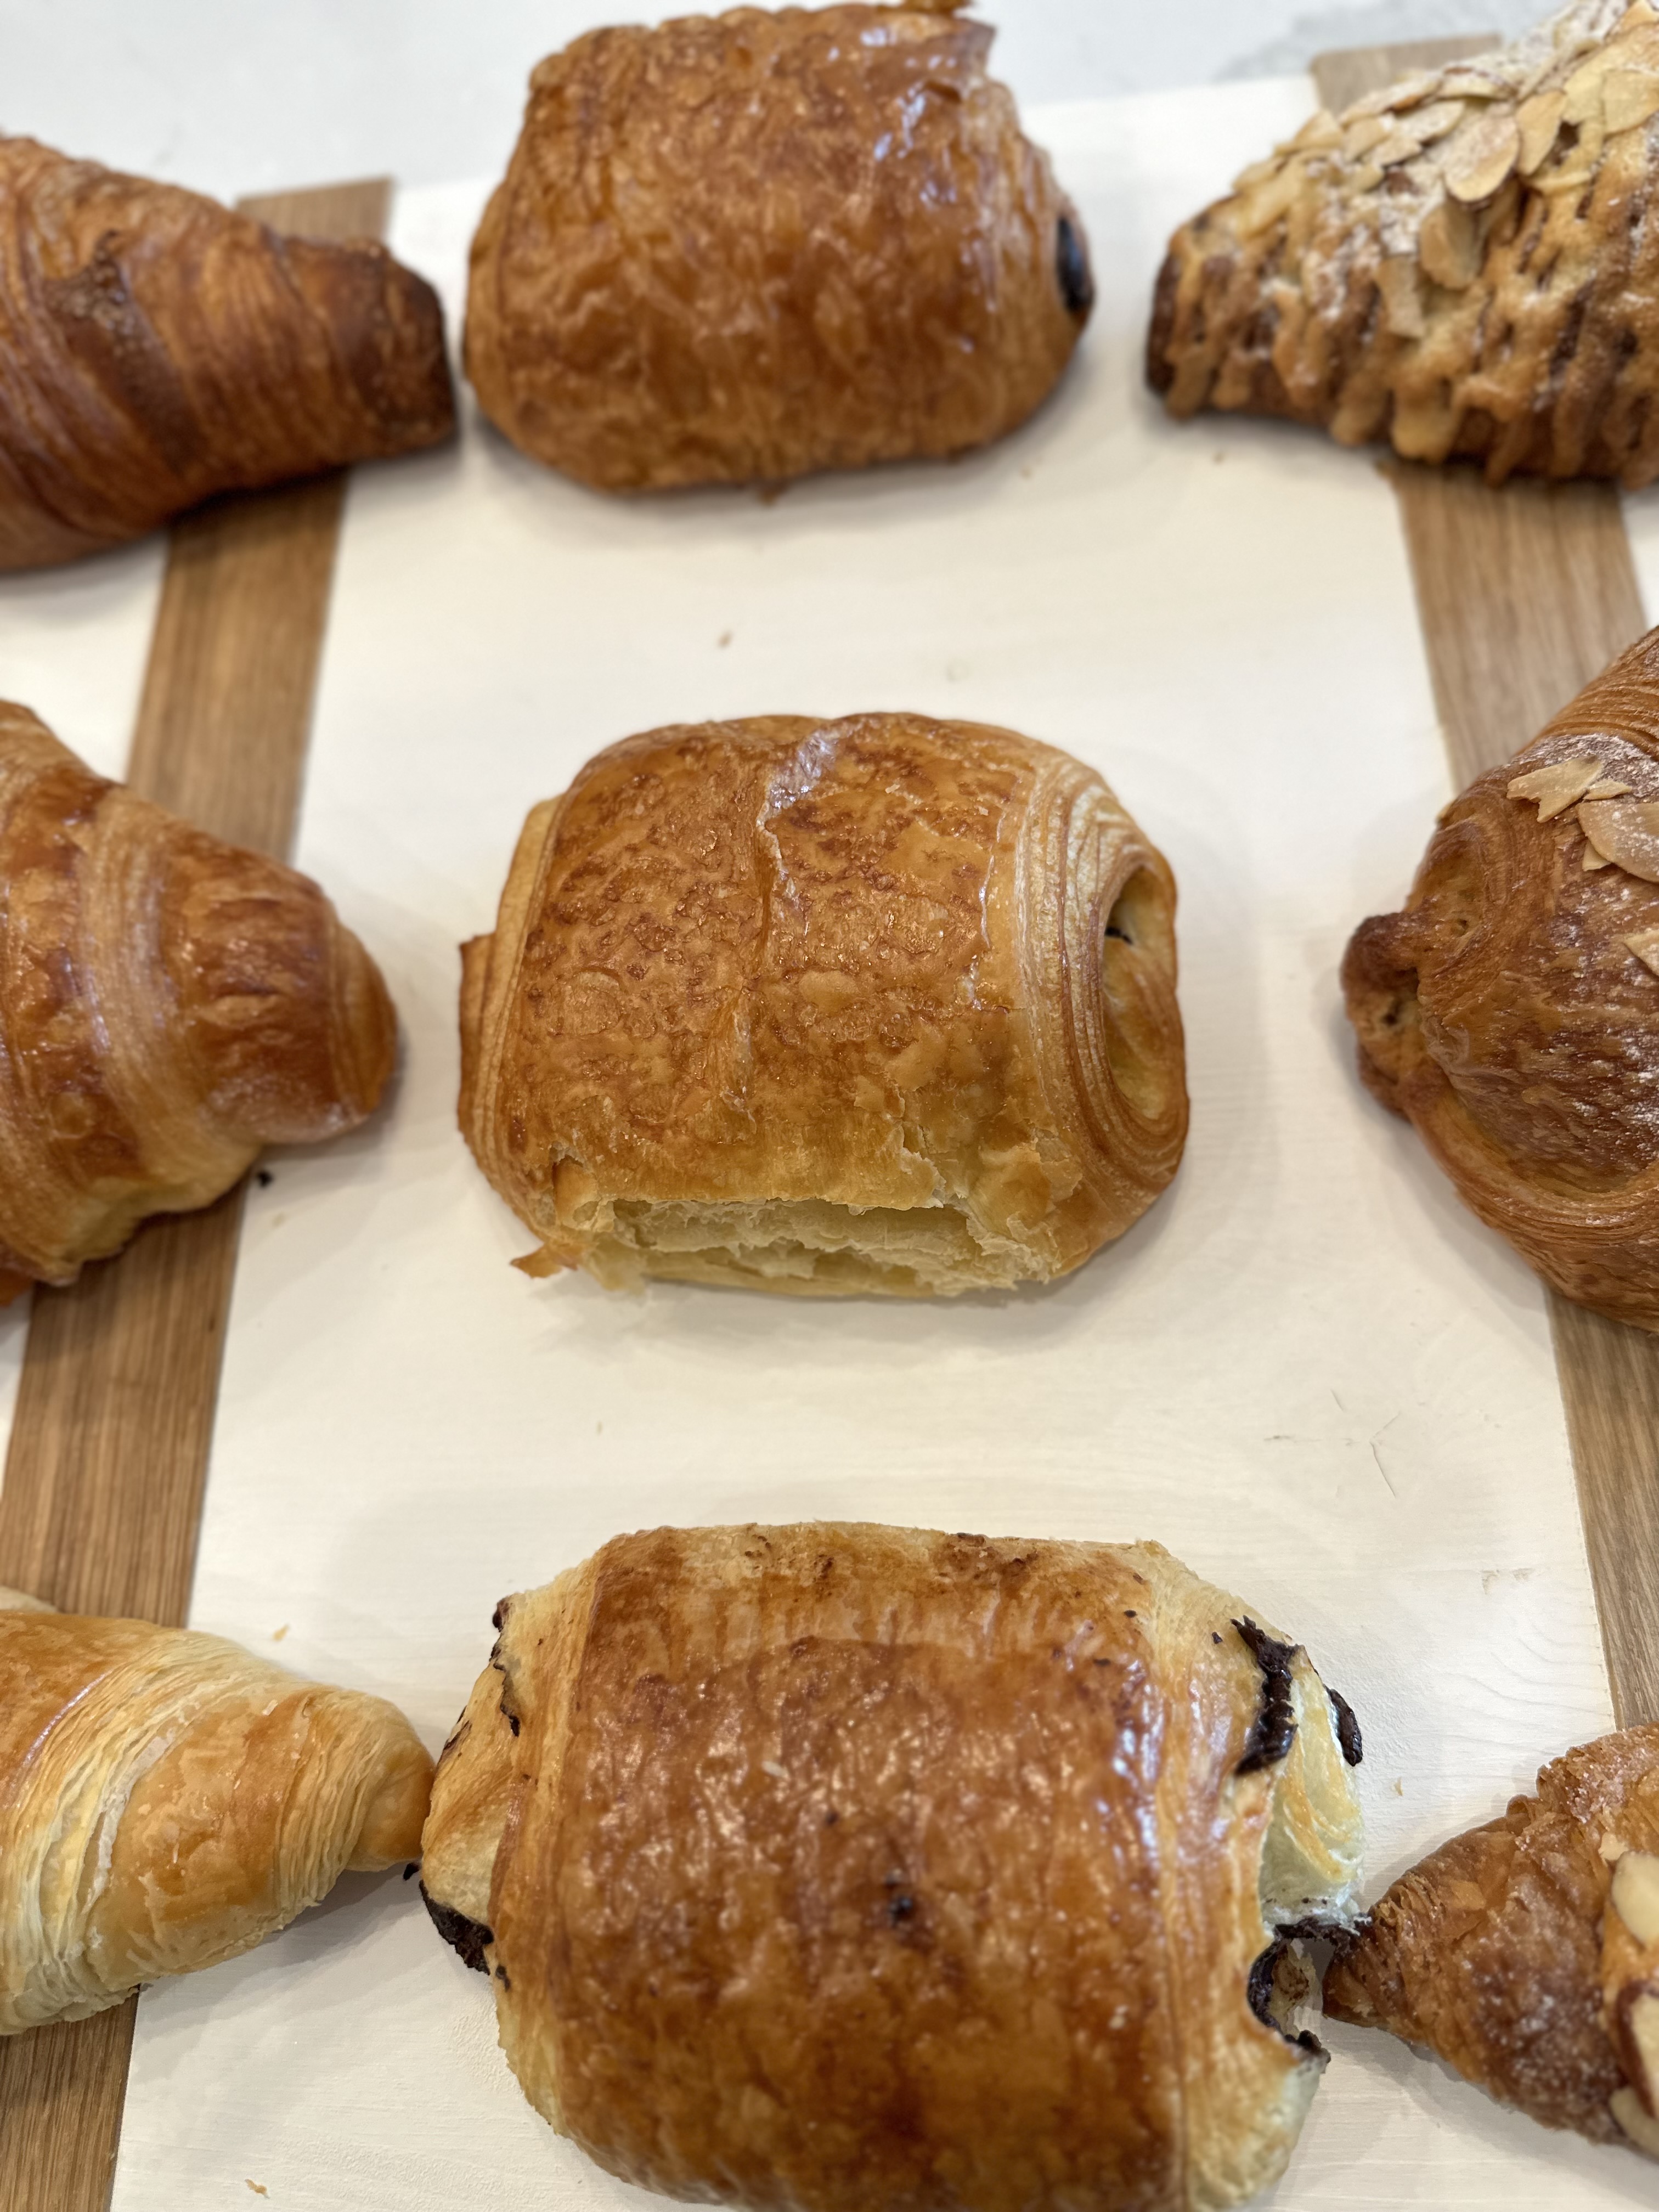 Battle of the Bakeries: Chocolate croissants in our taste test